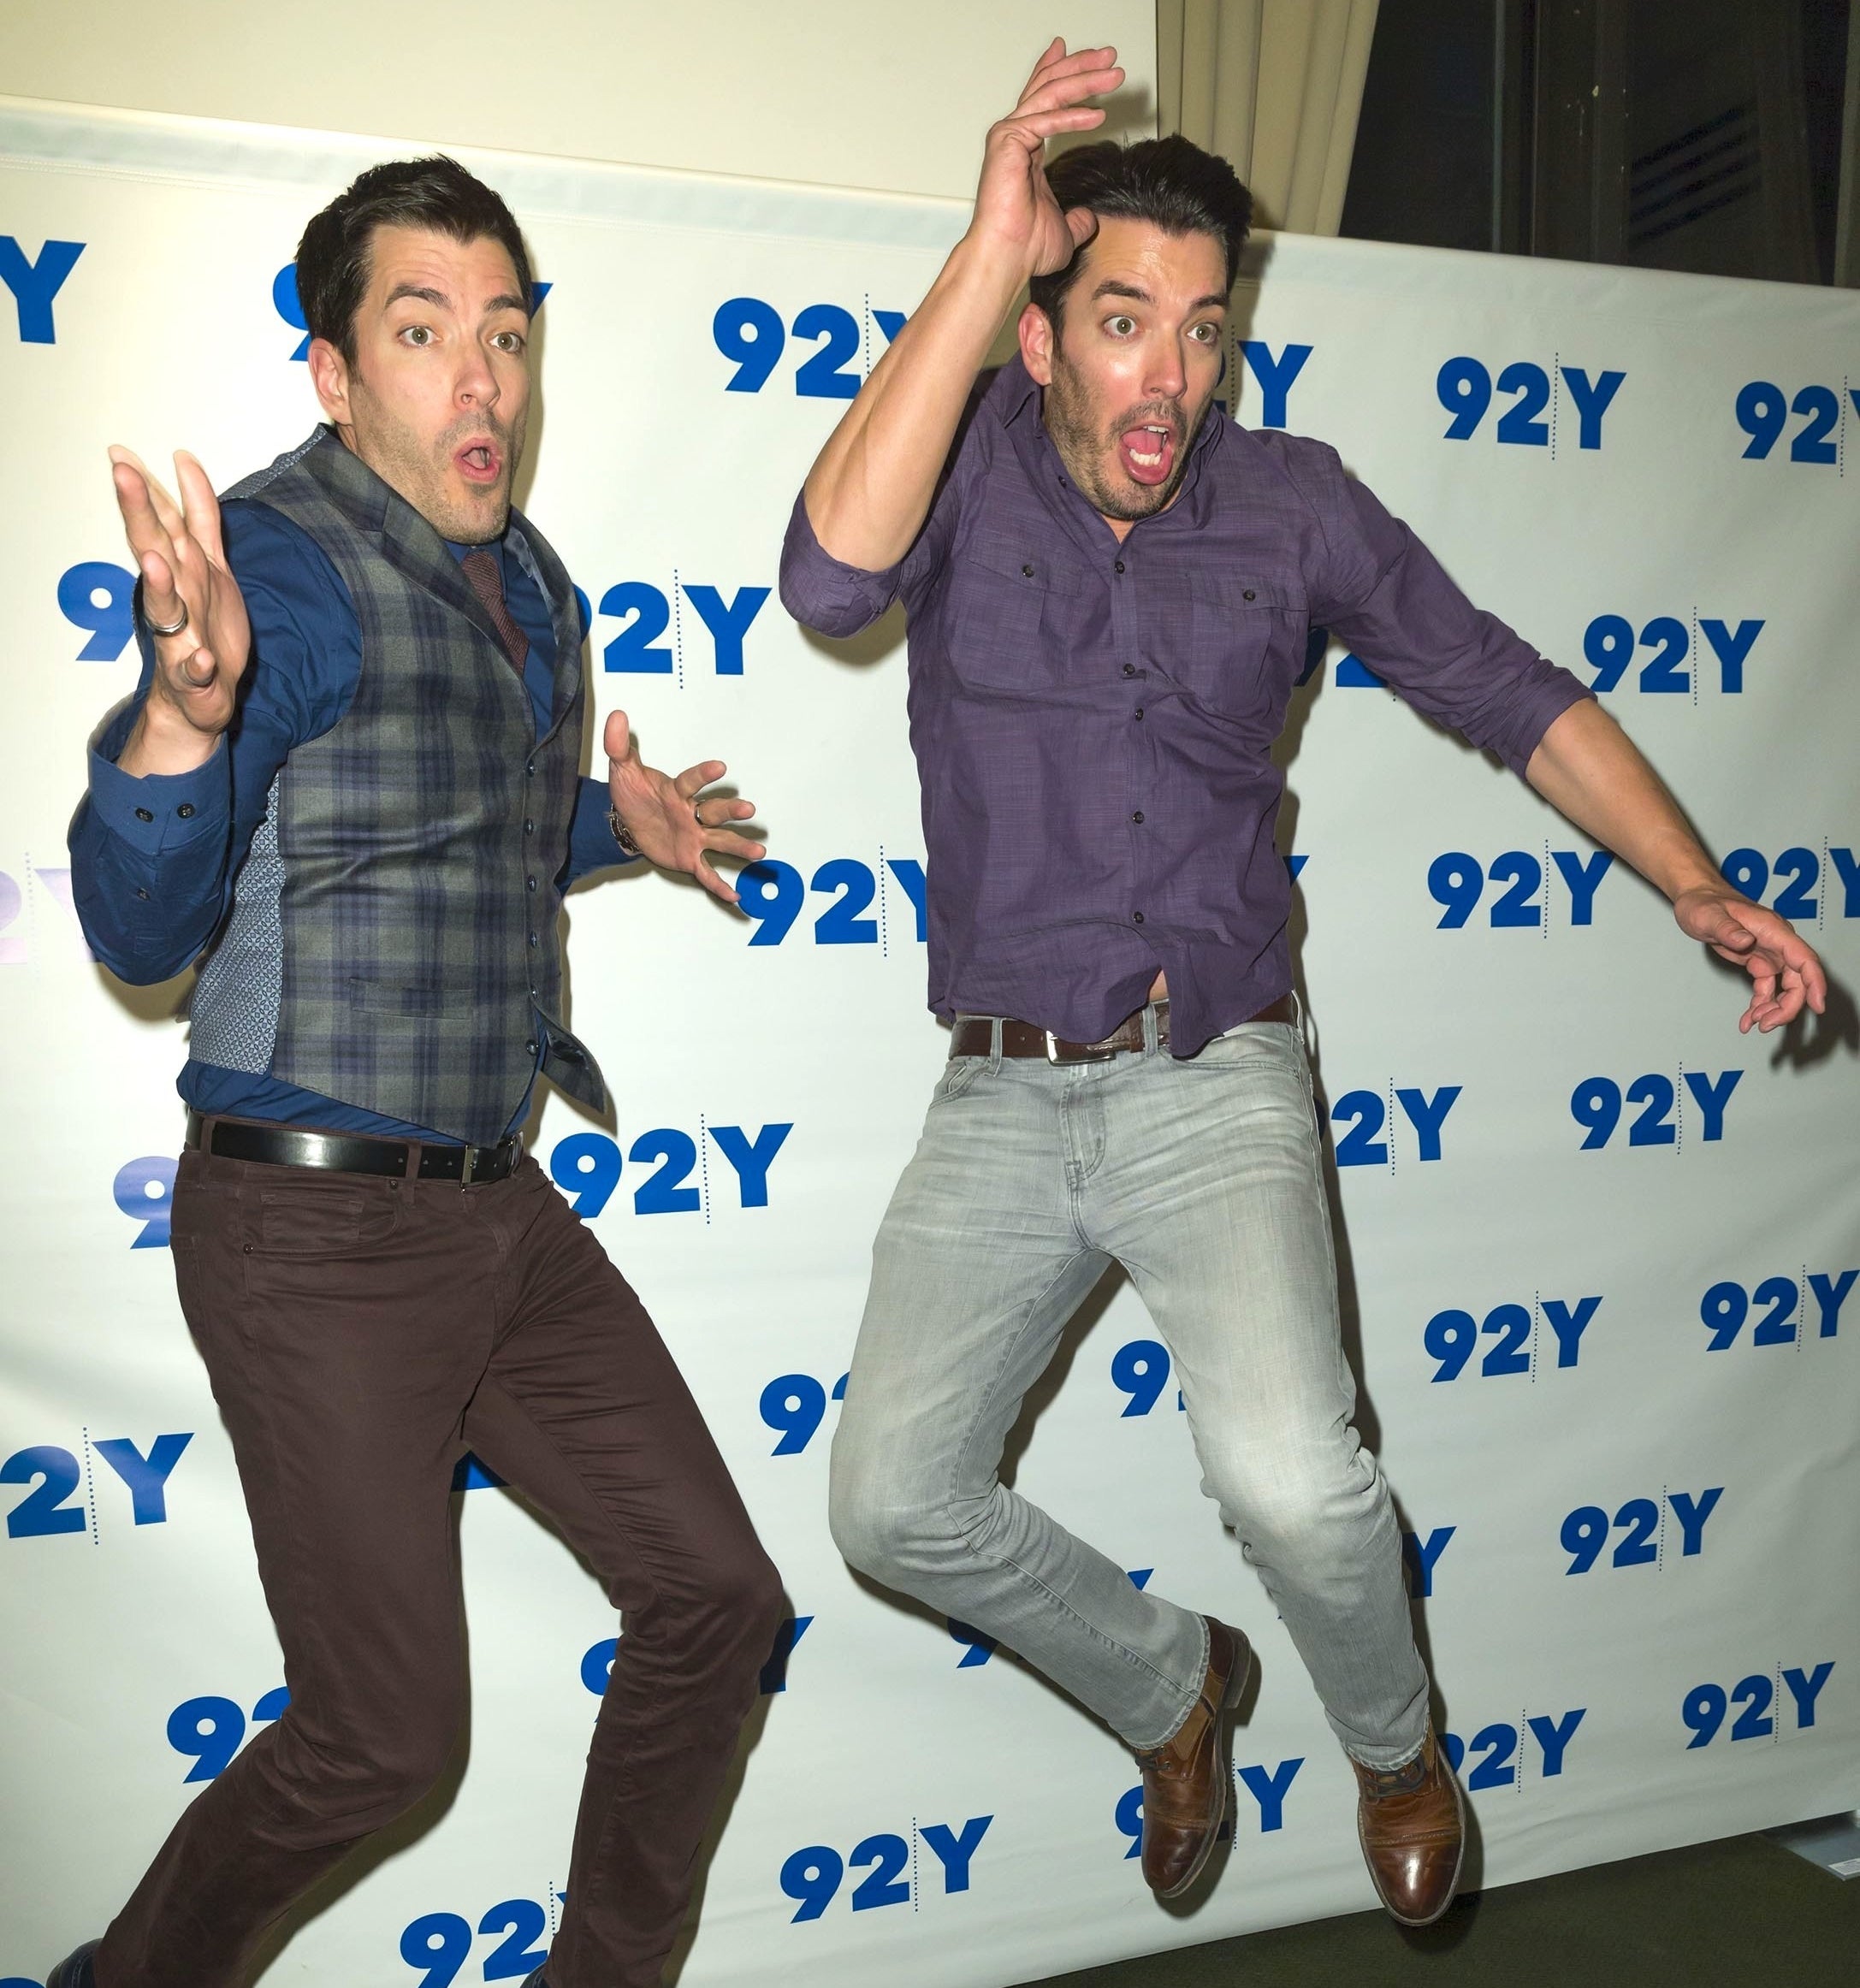 the property brother mid-jump